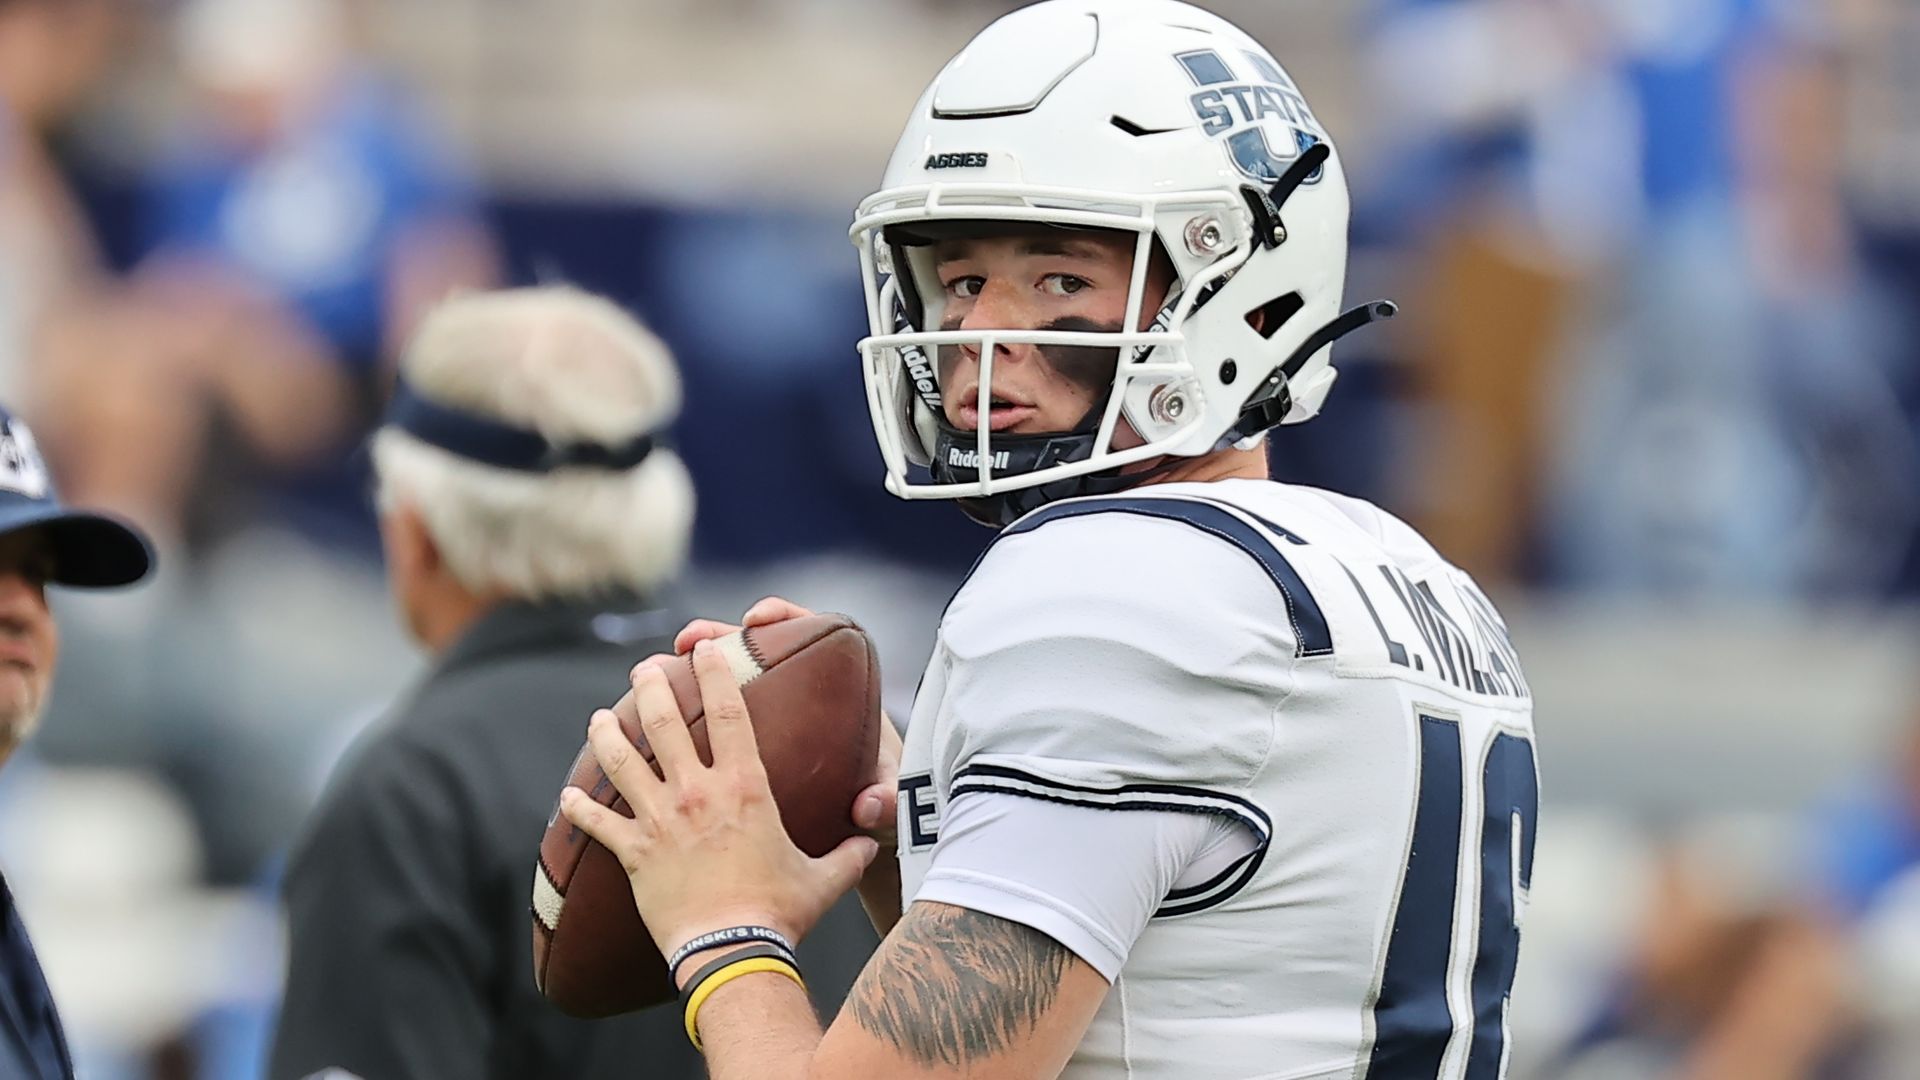 Instead of returning for his senior season, Utah State's Levi Williams said he hopes to start training next summer to be a Navy SEAL.